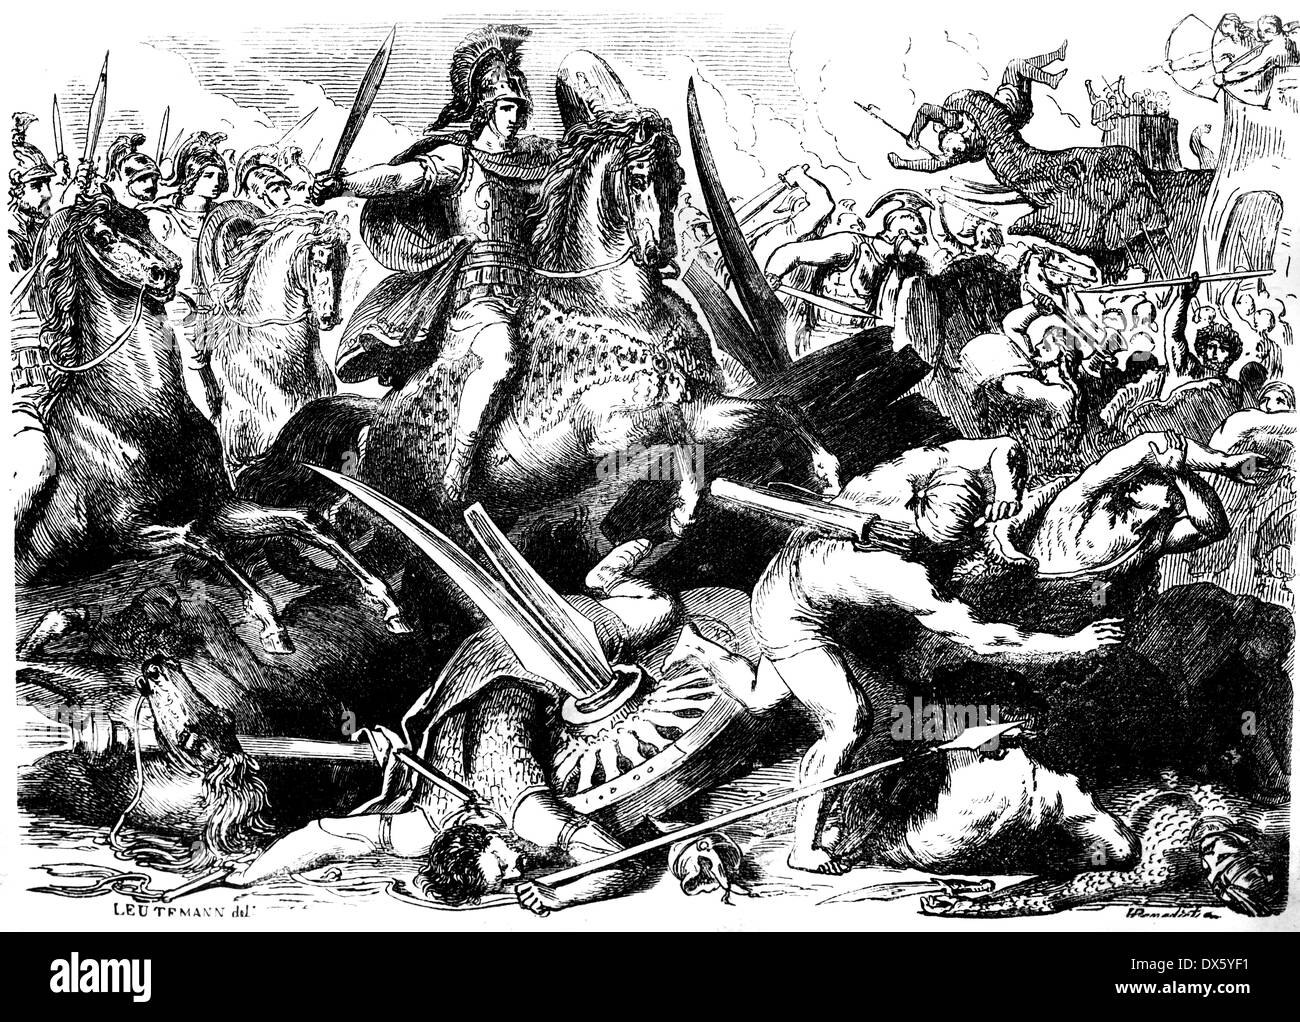 Alexander the Great at Battle of Gaugamela, illustration from book dated 1878 Stock Photo